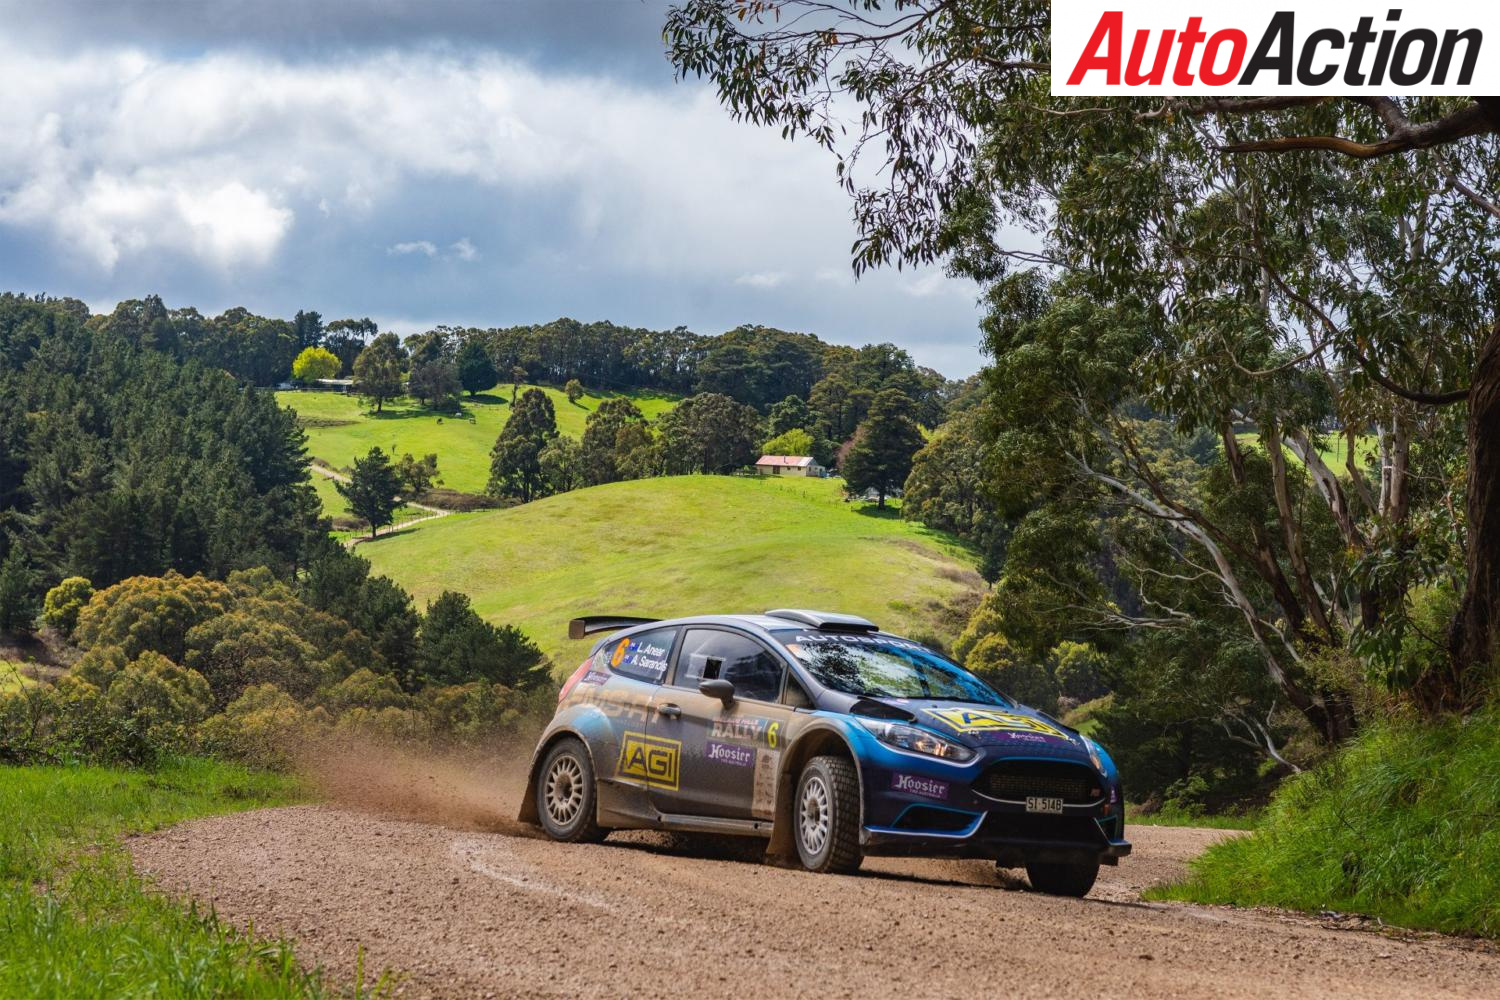 One event shootout replaces Australian Rally Championship in 2020 - Photo: Supplied